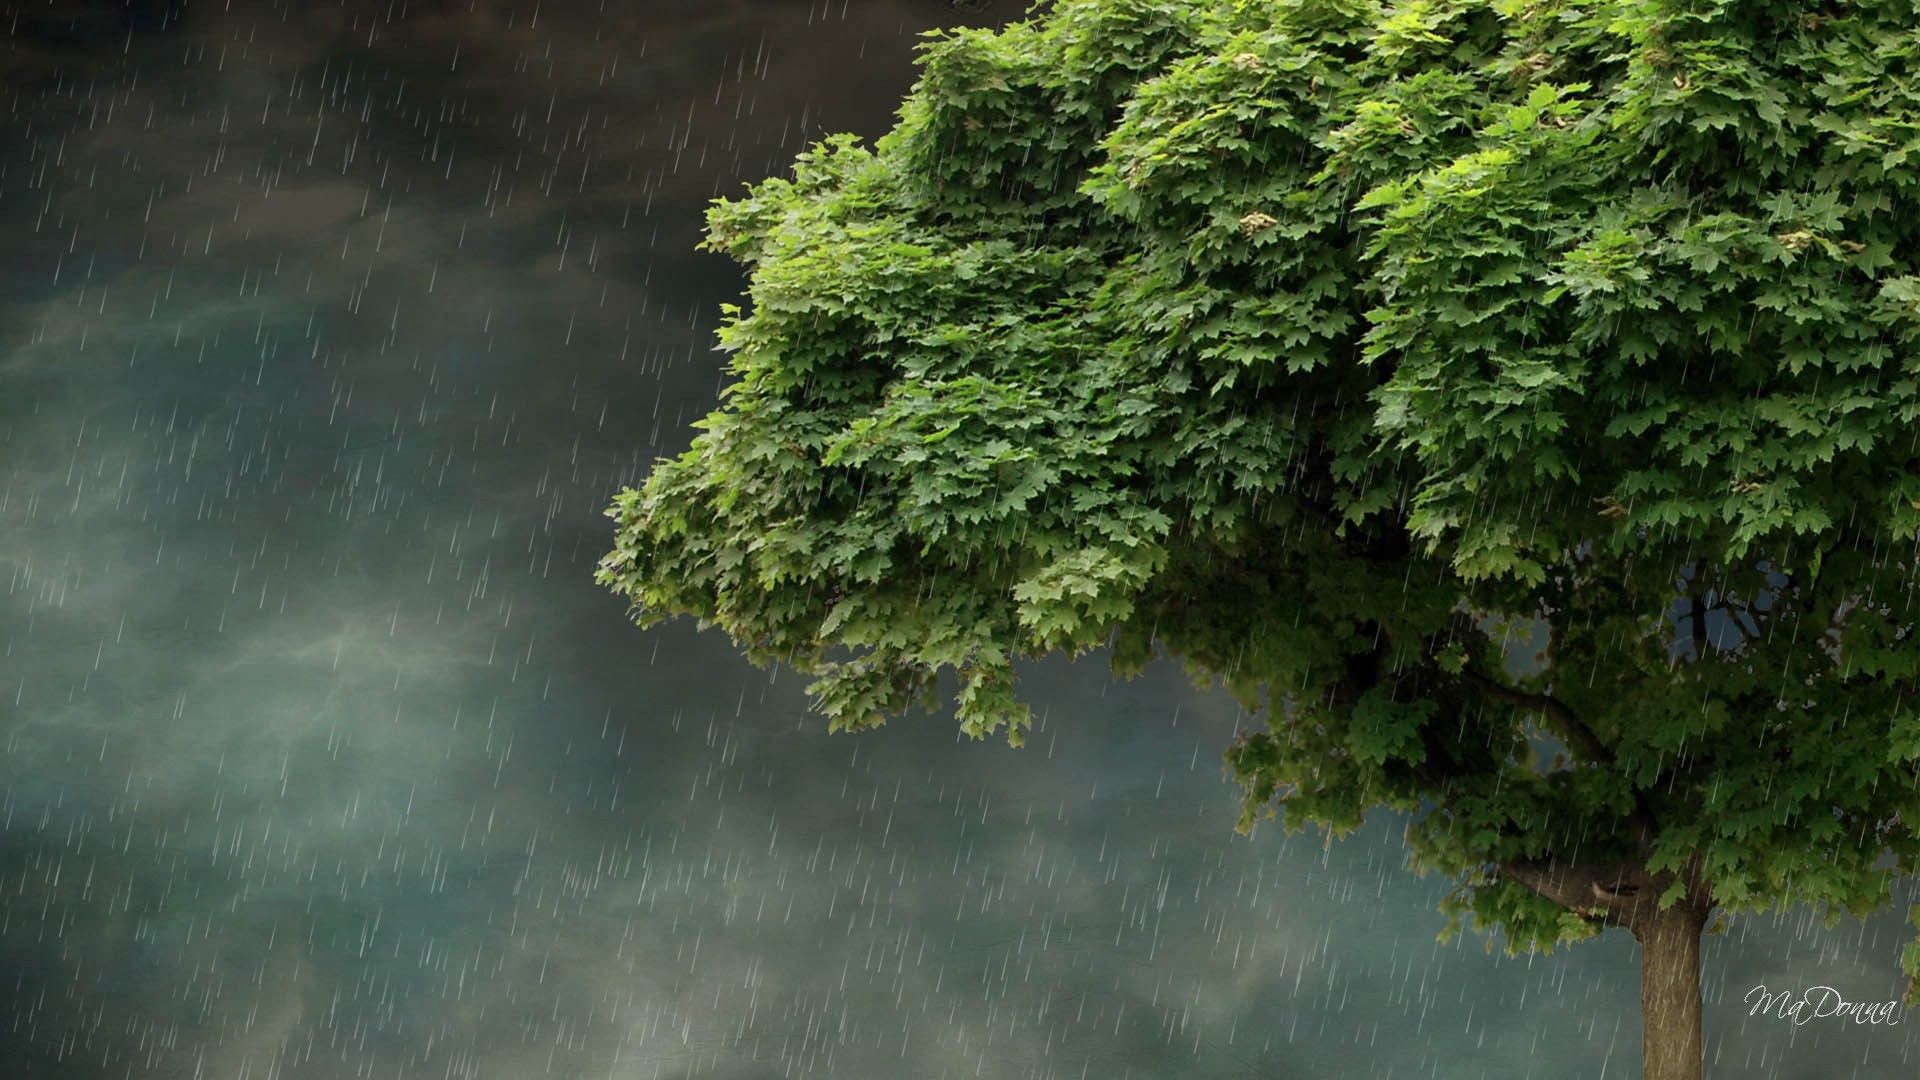 Rainy Spring Wallpapers